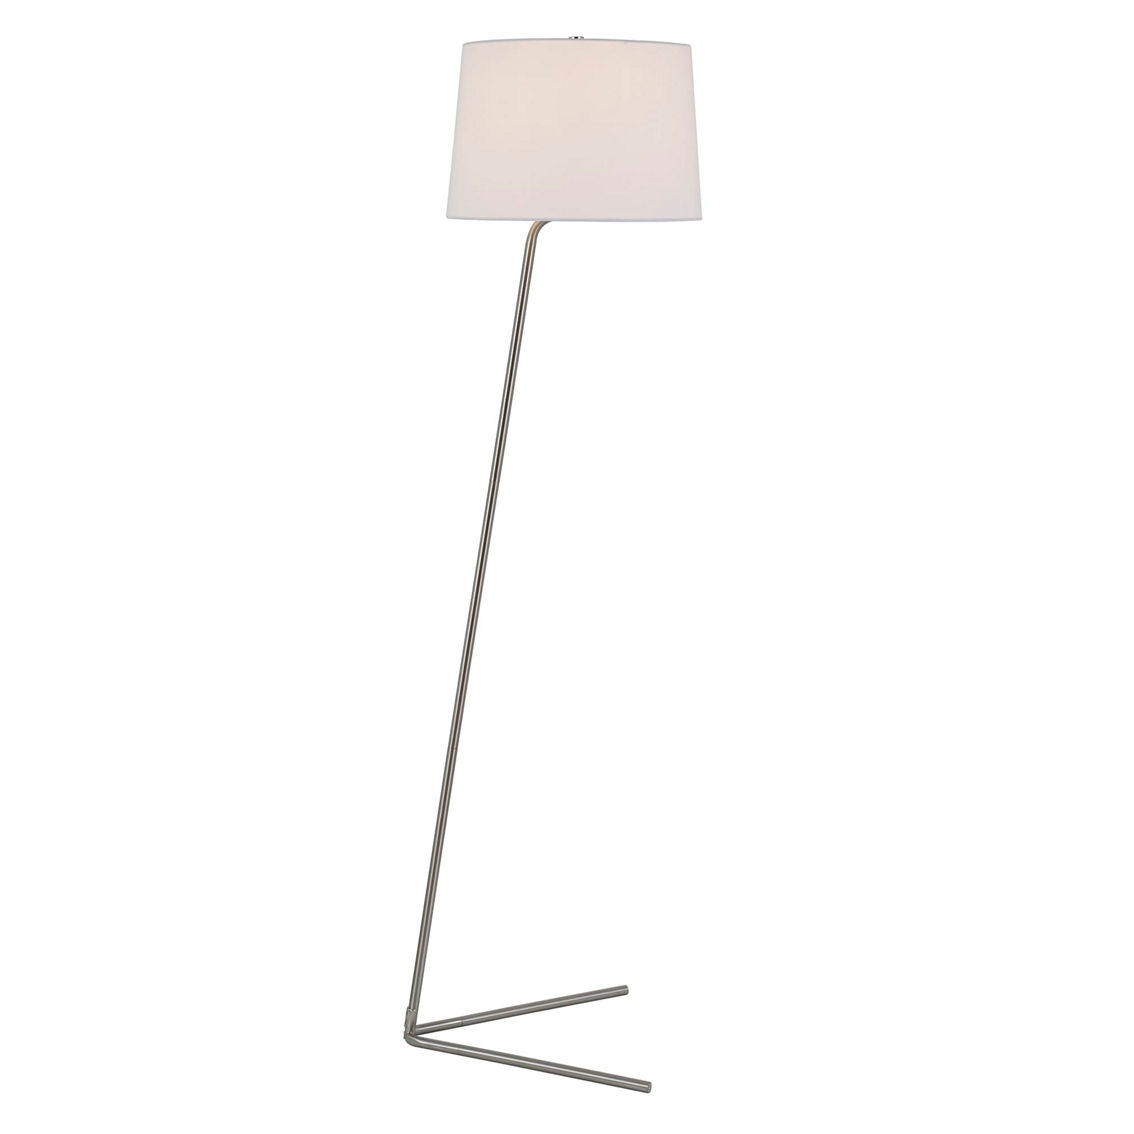 Hudson&Canal Markos Tilted Floor Lamp with Fabric Shade - Image 3 of 5